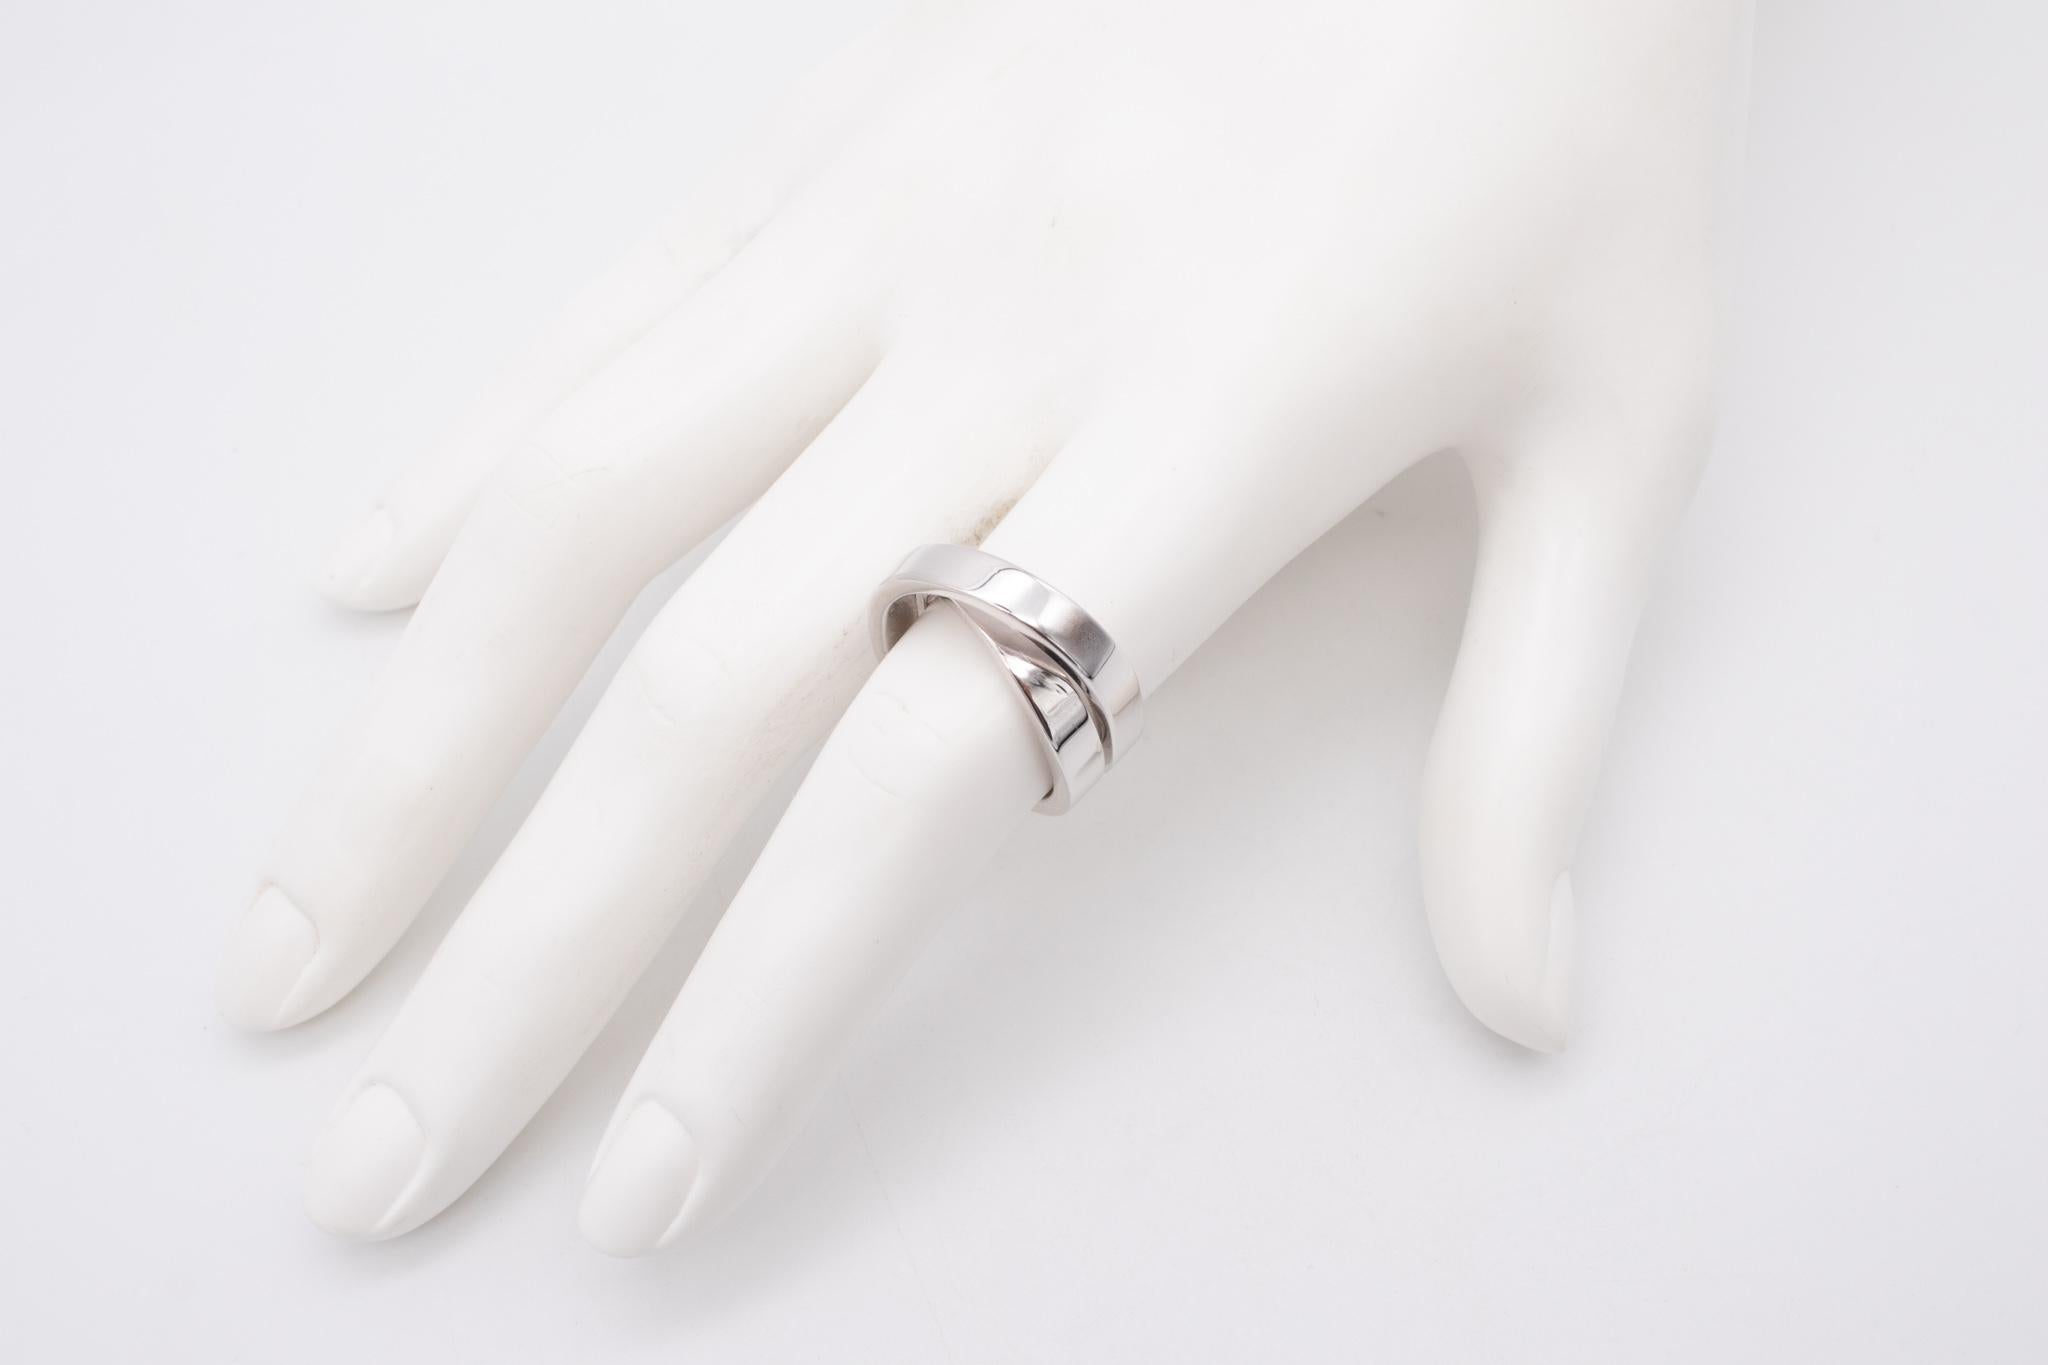 Great Nouvelle vague crossover ring designed by Cartier.

This piece is one of the most popular iconic designs from the house of Cartier of the 21th century. It was crafted in solid 18 karats of very high polished white gold.

Have total weight of